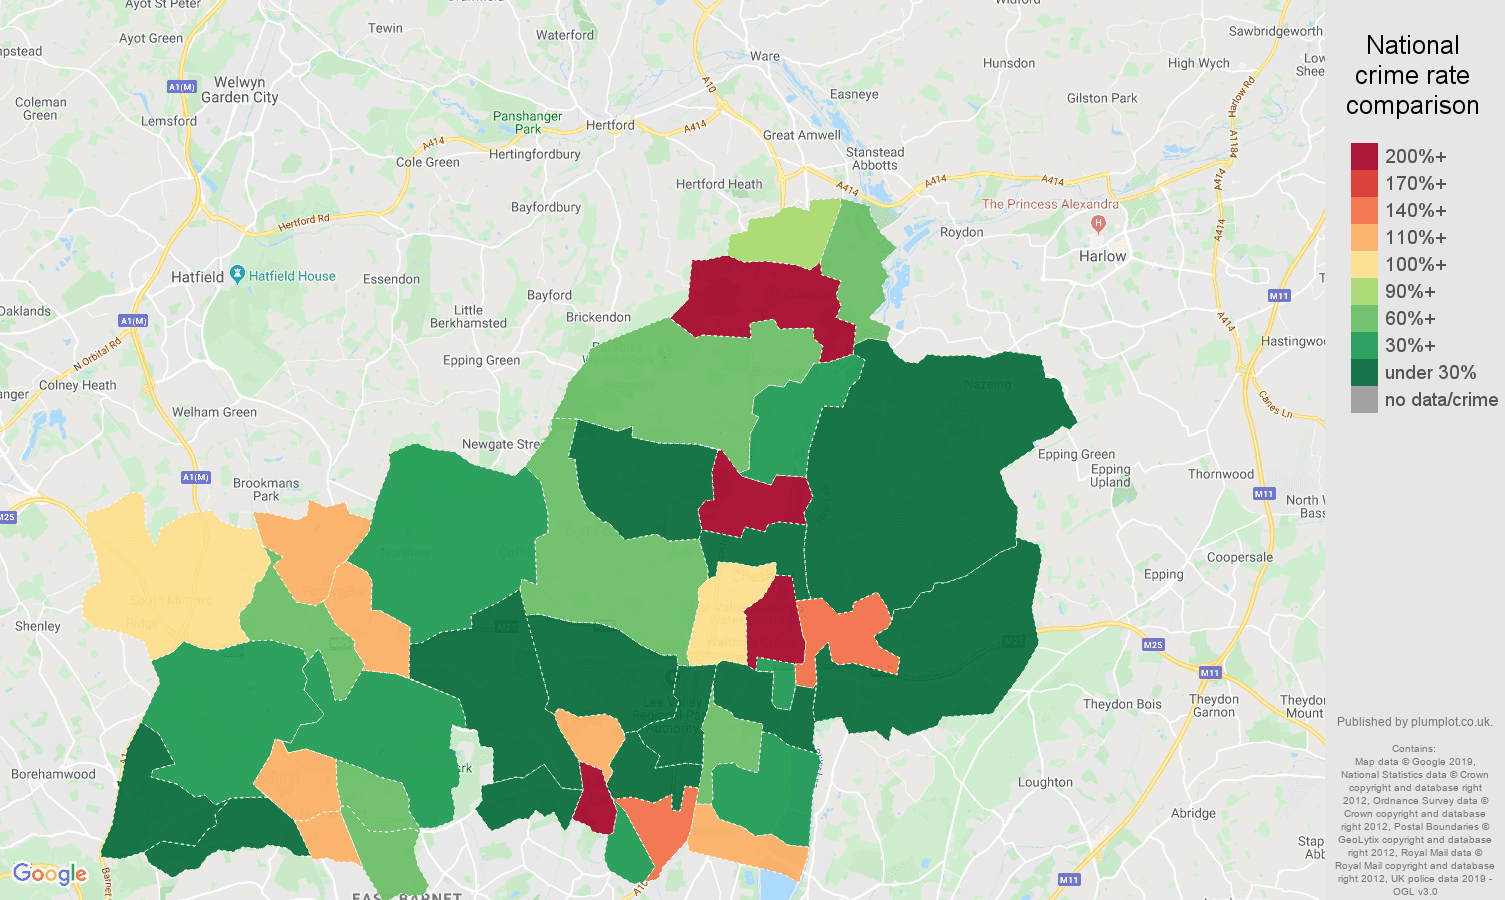 Enfield shoplifting crime rate comparison map